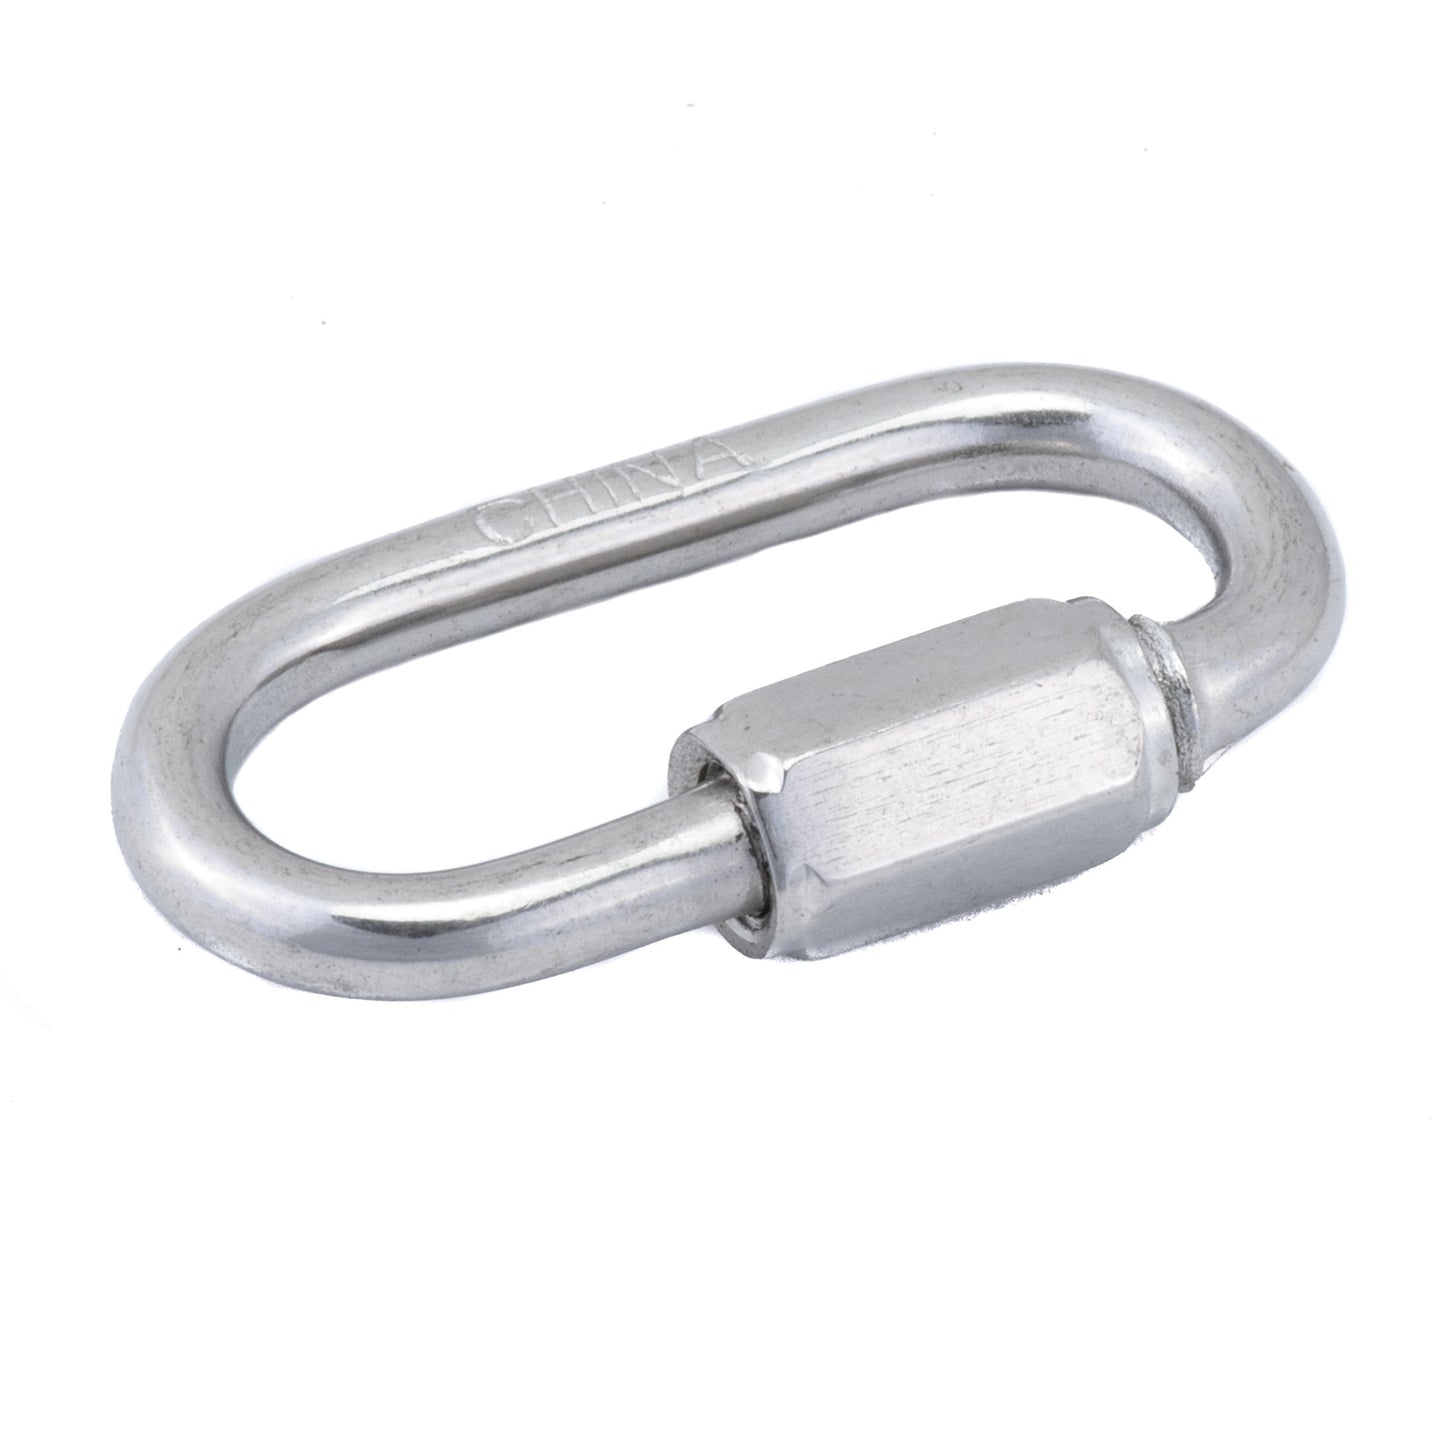 1-15/16" Stainless Steel Quick Link